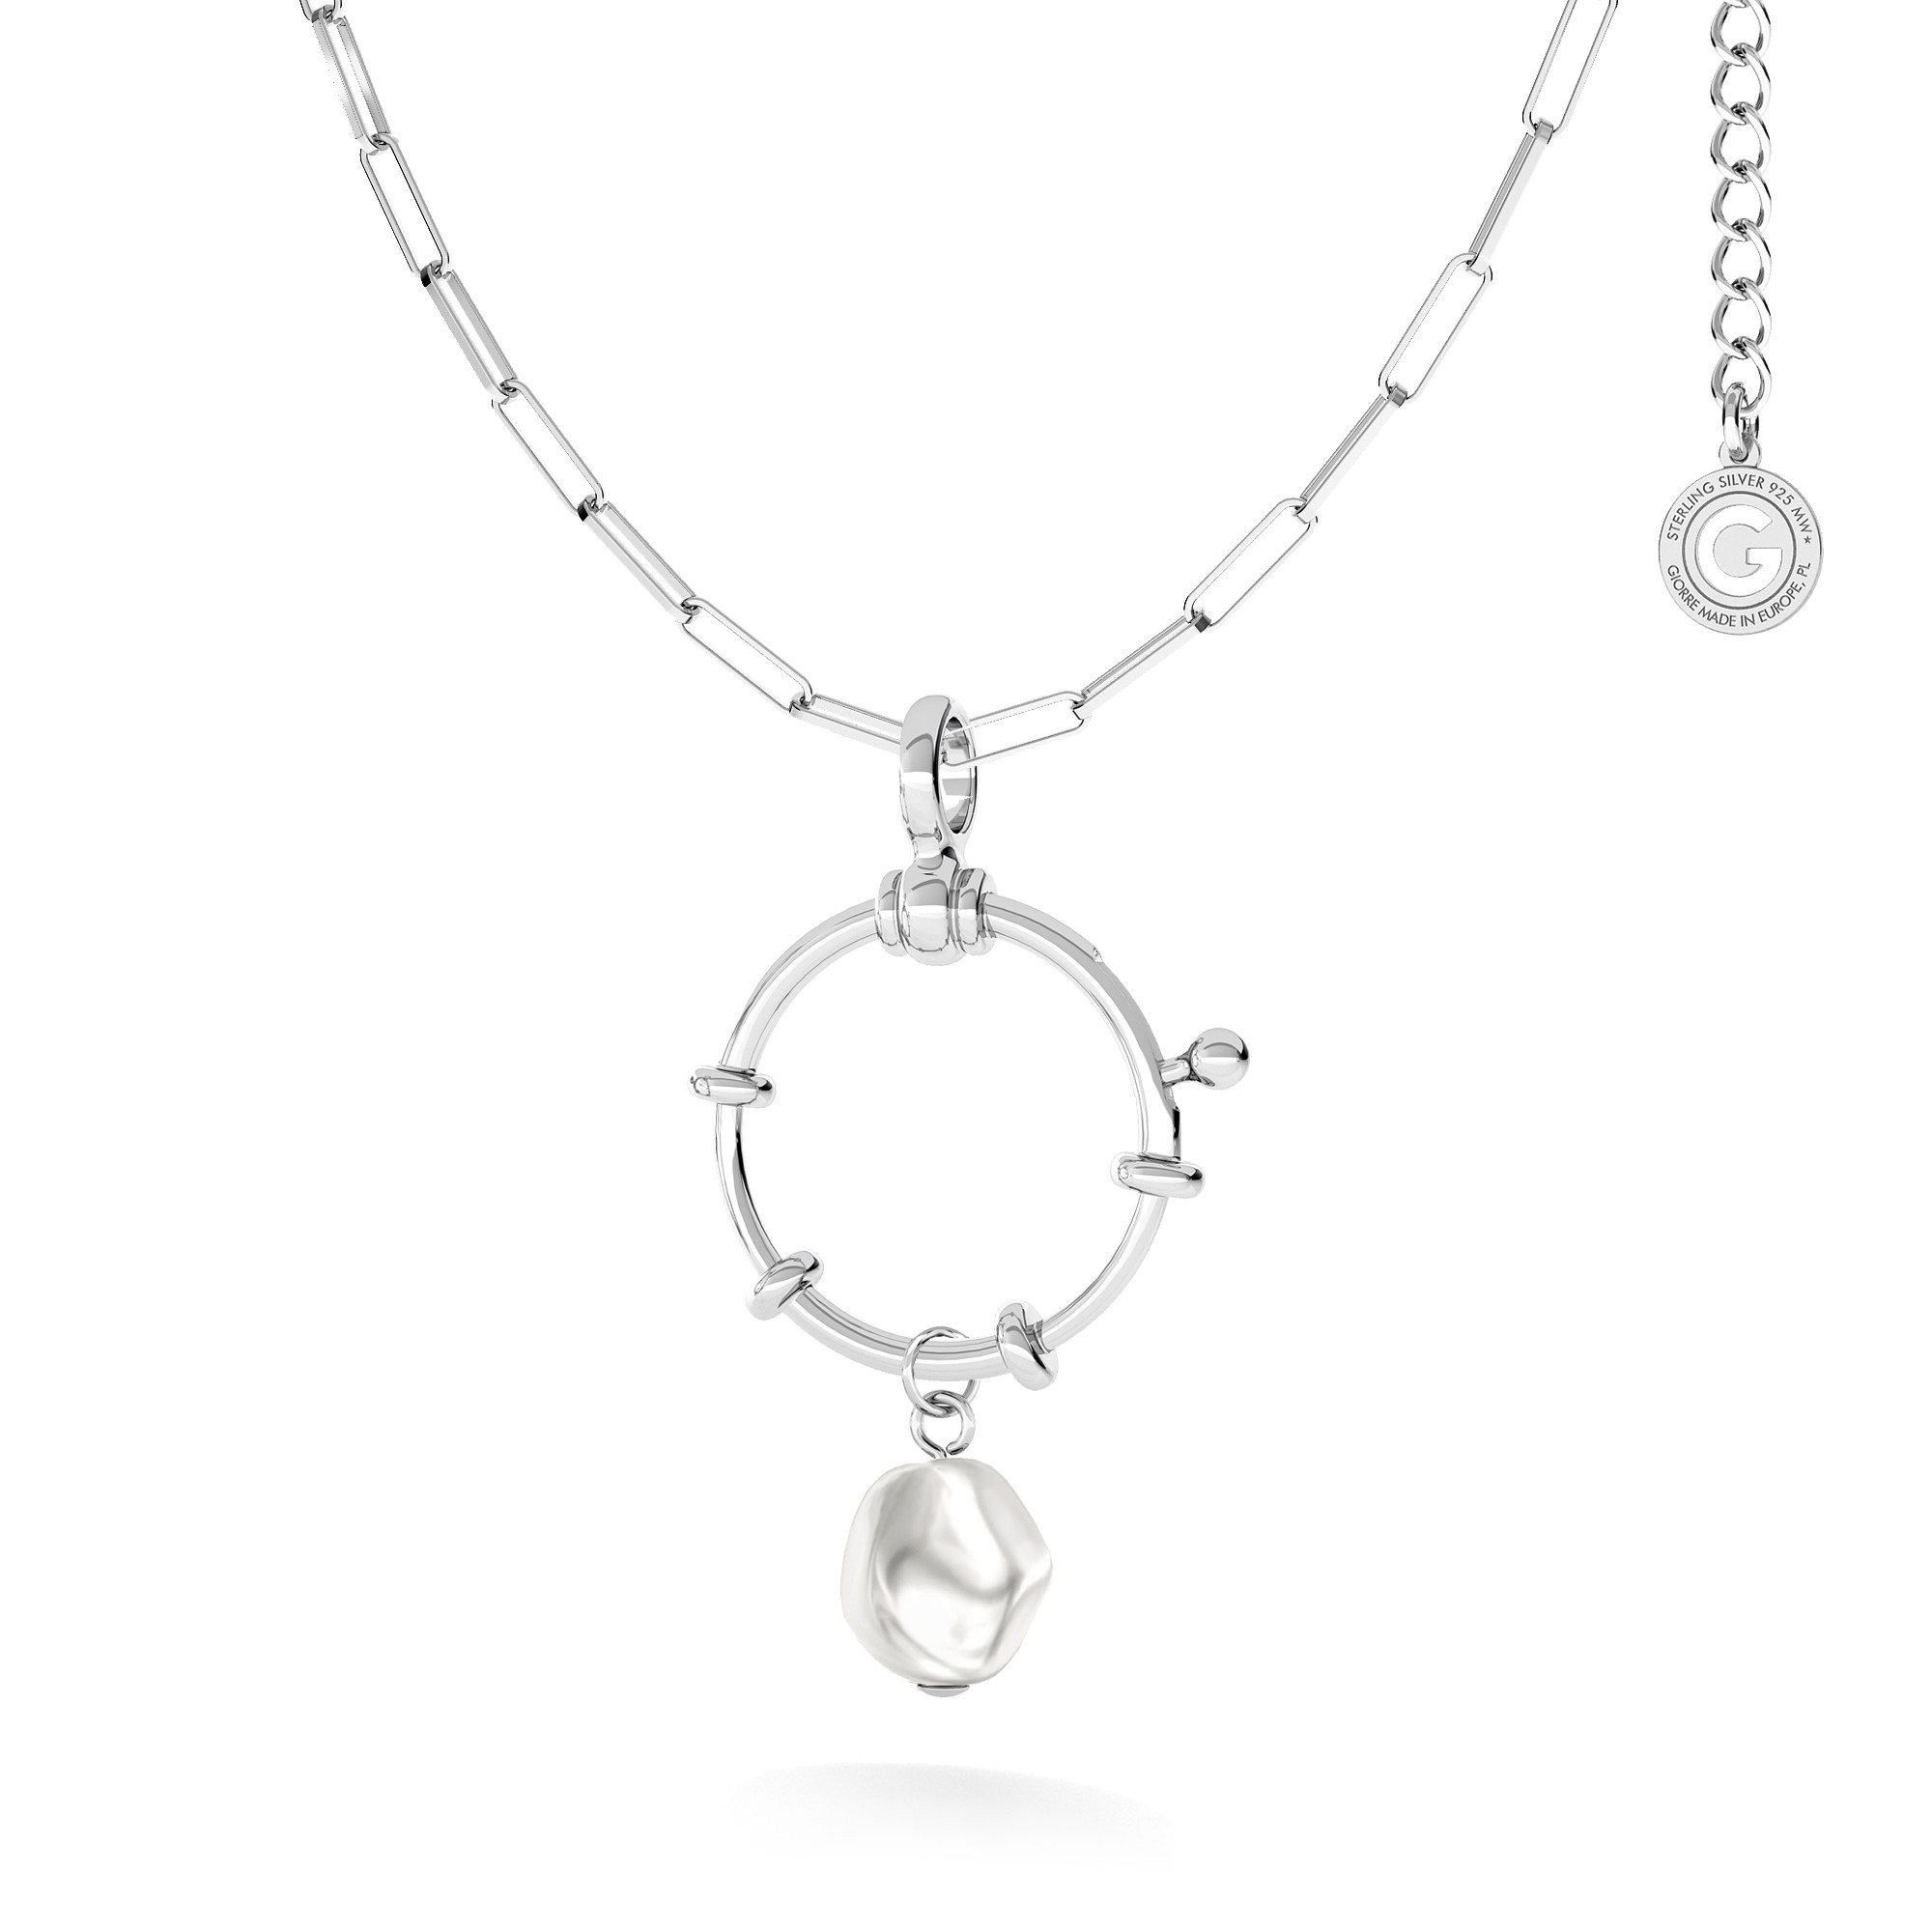 Necklace with irregular pearl, sterling silver 925